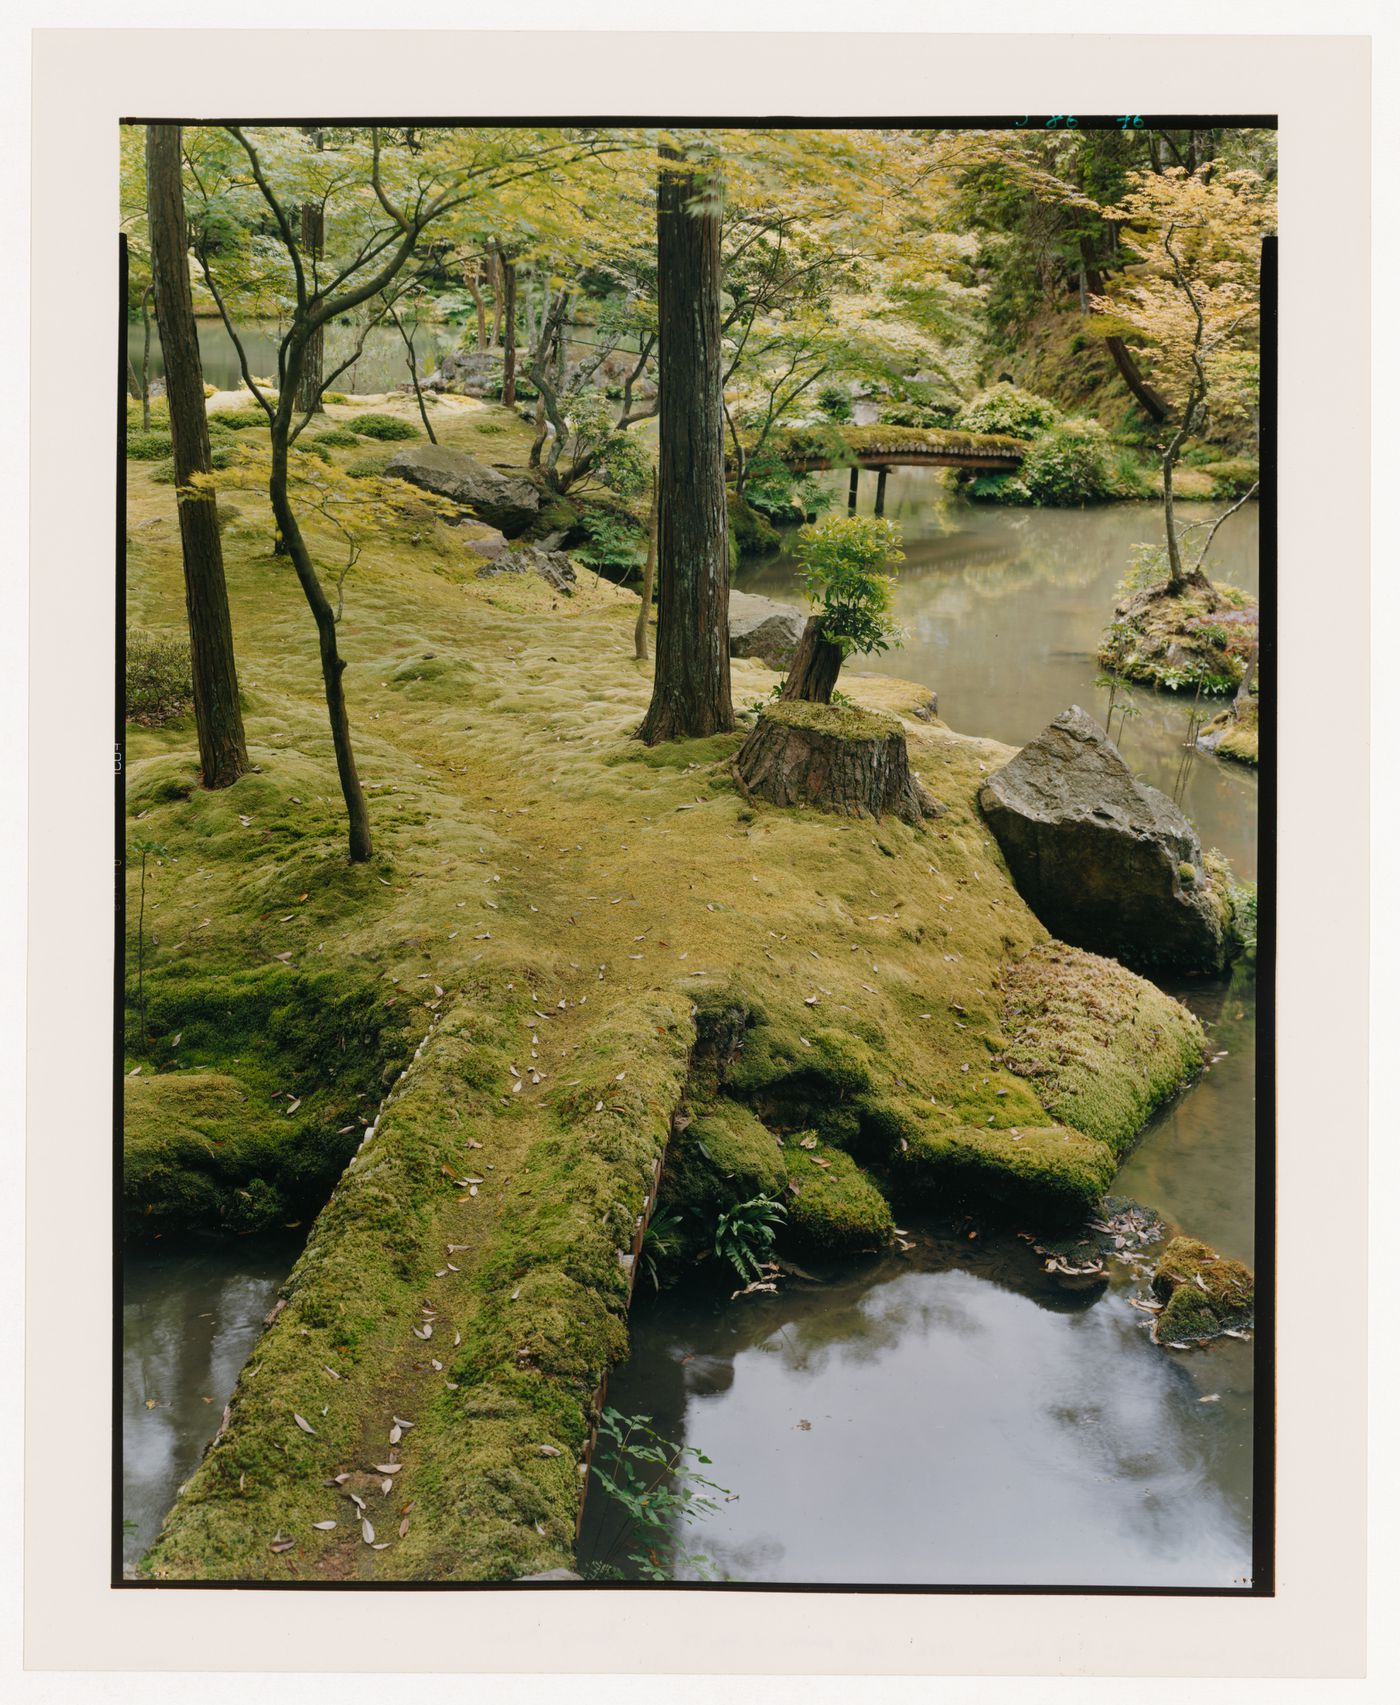 View of two footbridges, a pond and trees in the Moss Garden, Saihoji (also known as Kokedera [Moss Temple]), Kyoto, Japan